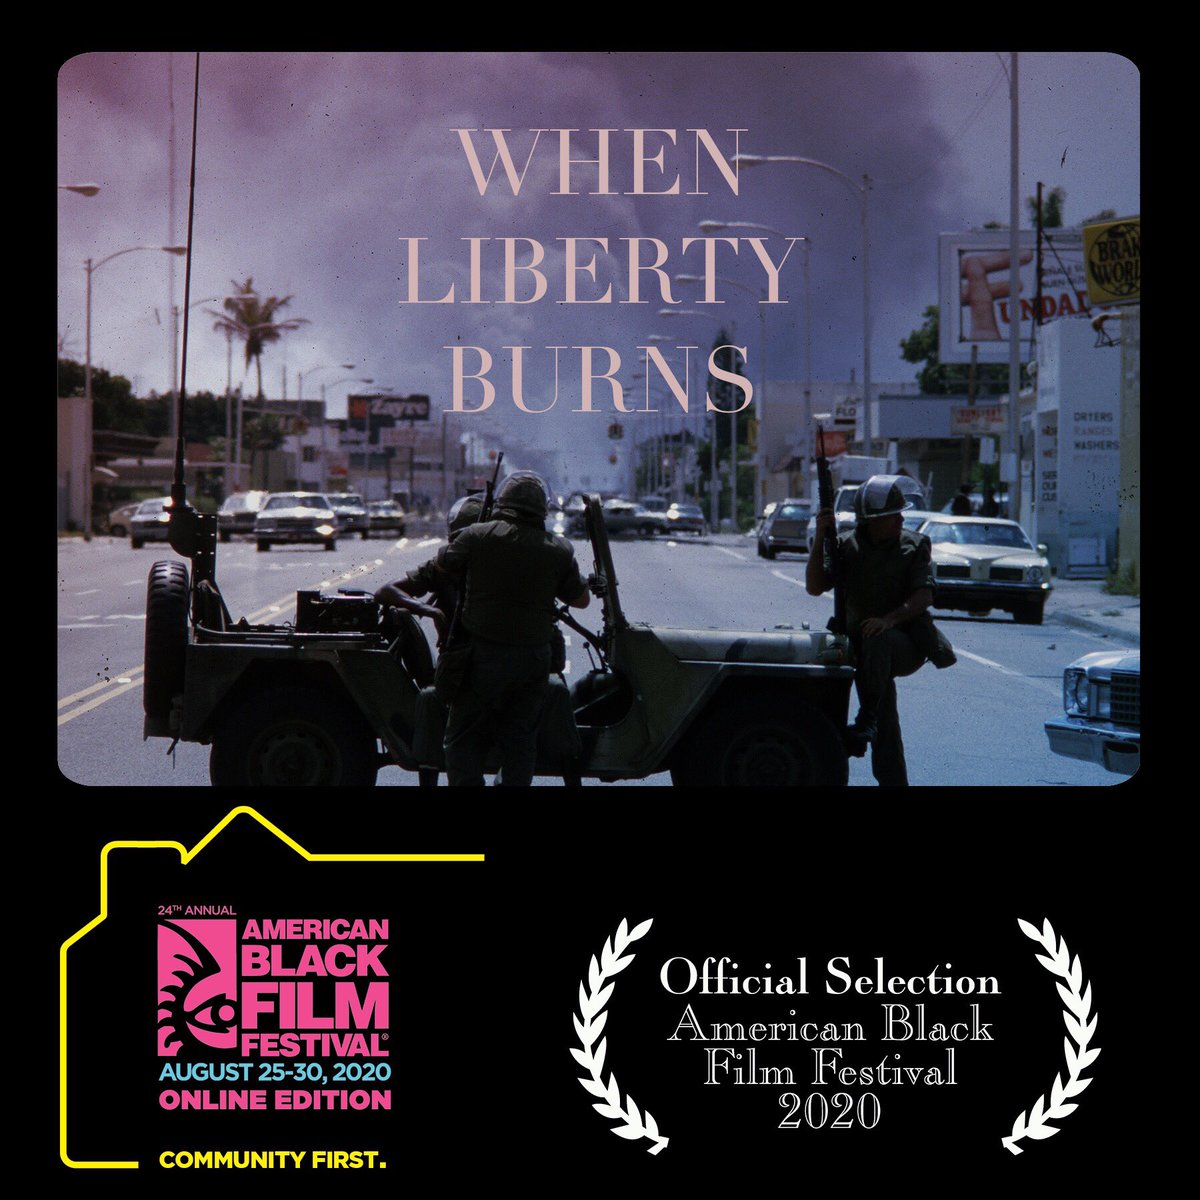 We are happy to have been selected at @americanblackfilmfestival this year. Looking forward to it. #abff #whenlibertyburns #mcduffie